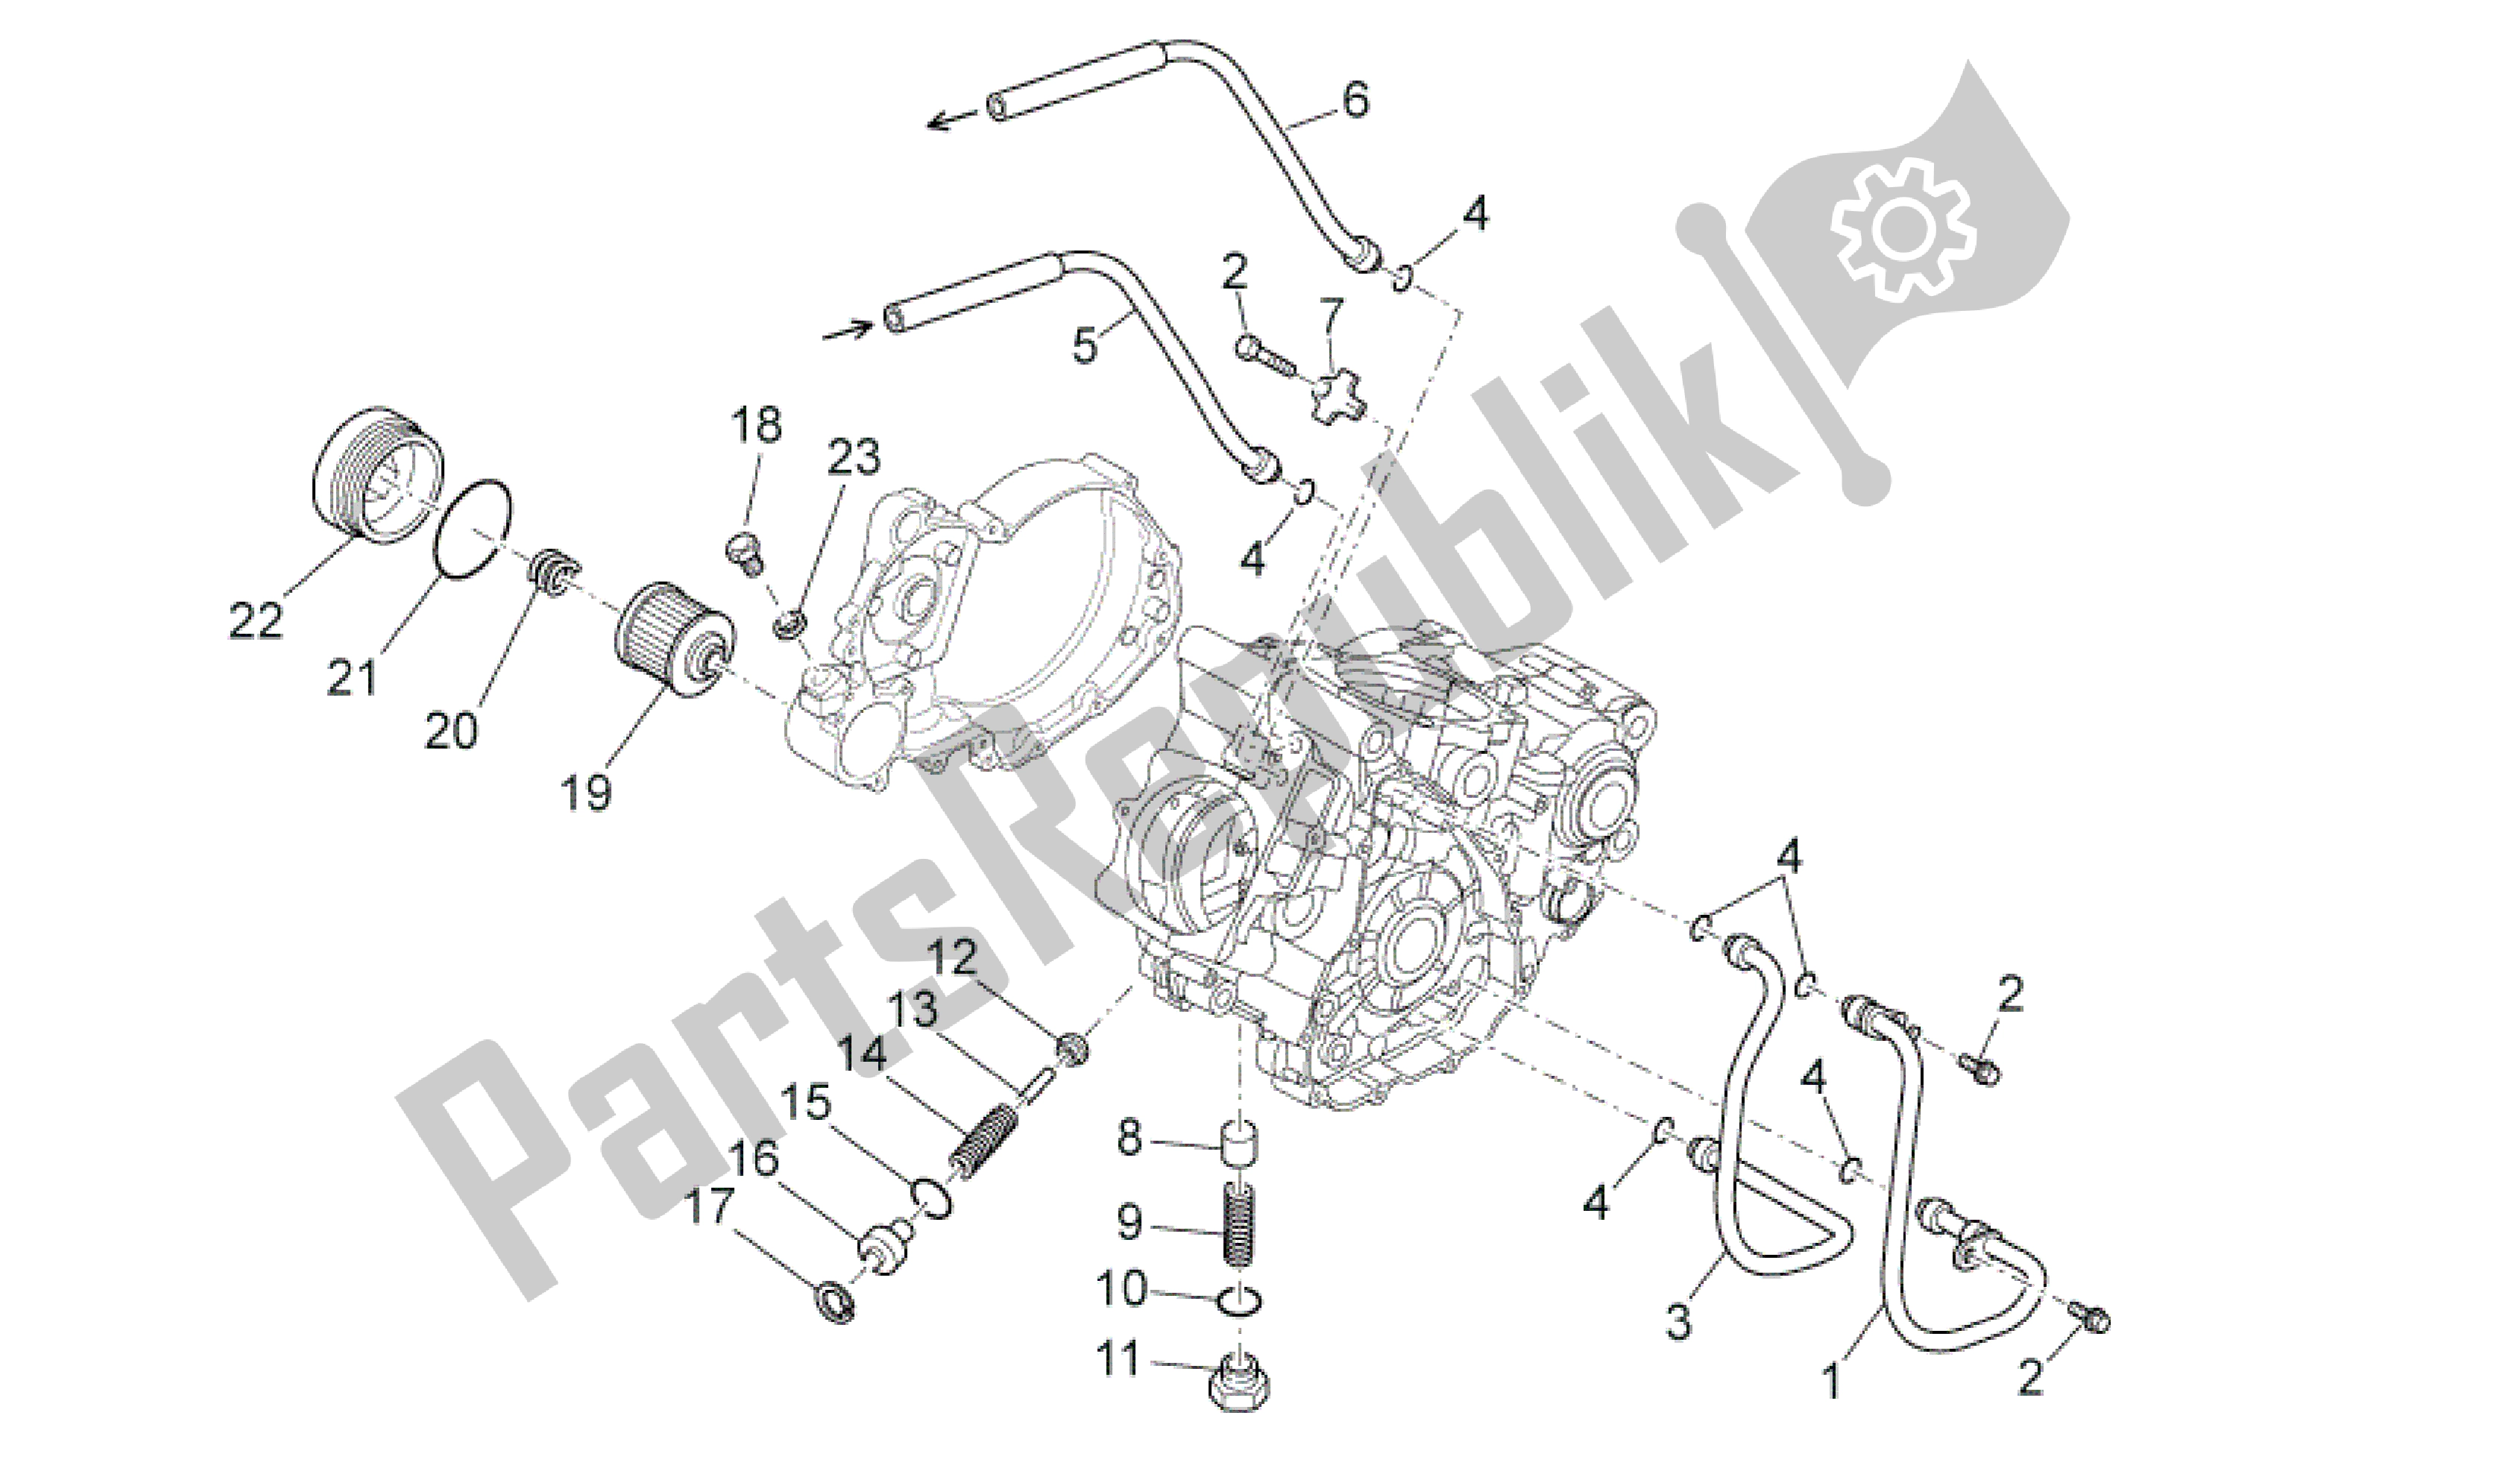 All parts for the Lubrication of the Aprilia SXV 450 2009 - 2011